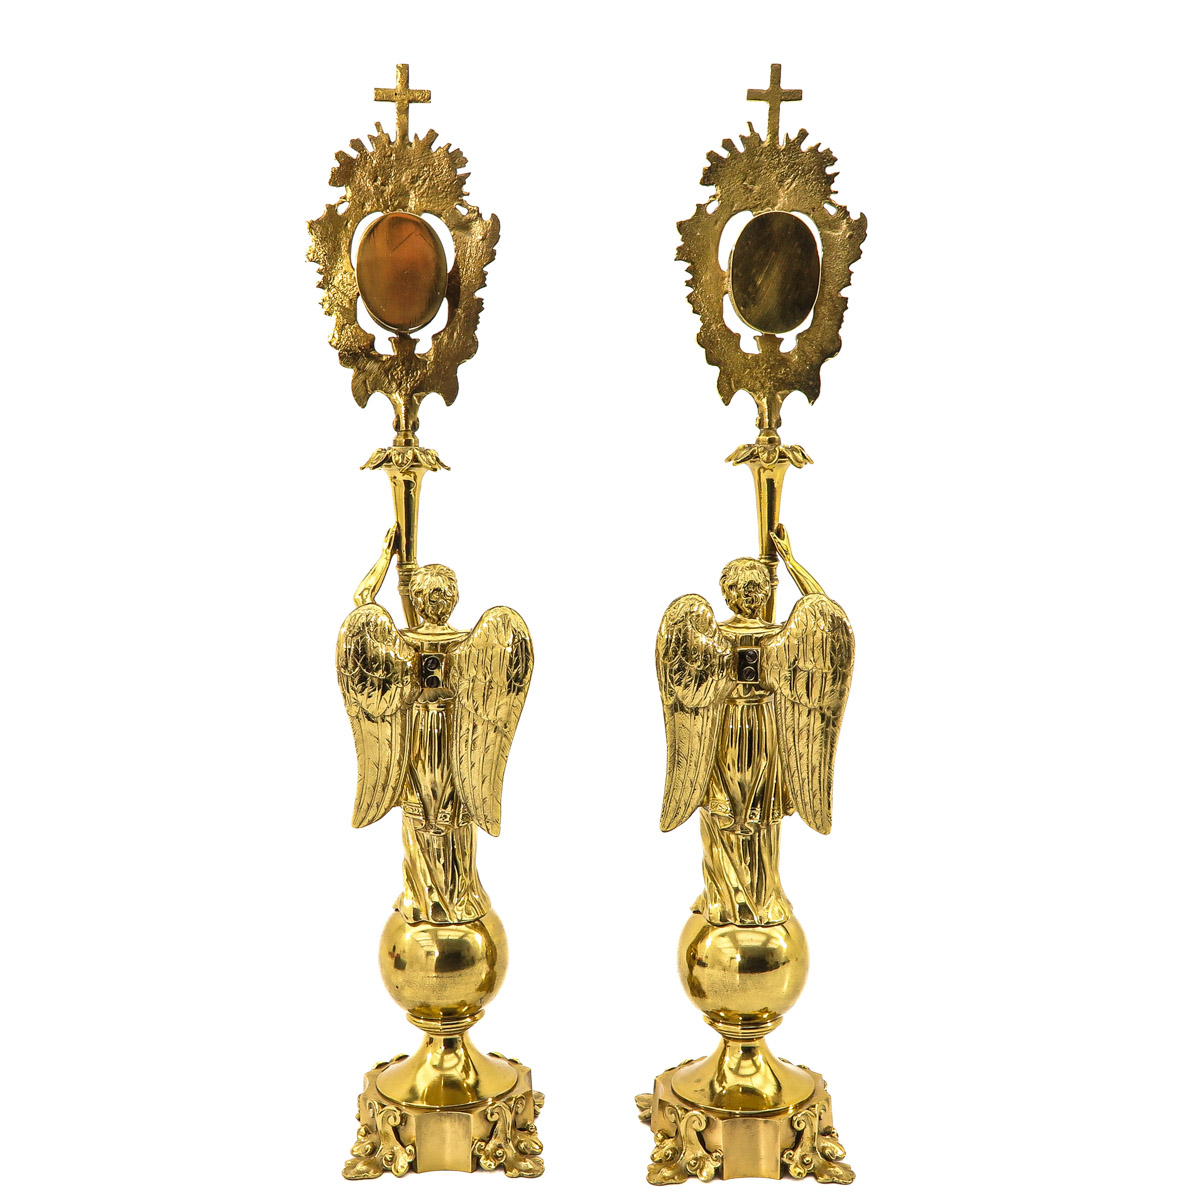 A Pair of Reliquaries - Image 3 of 10